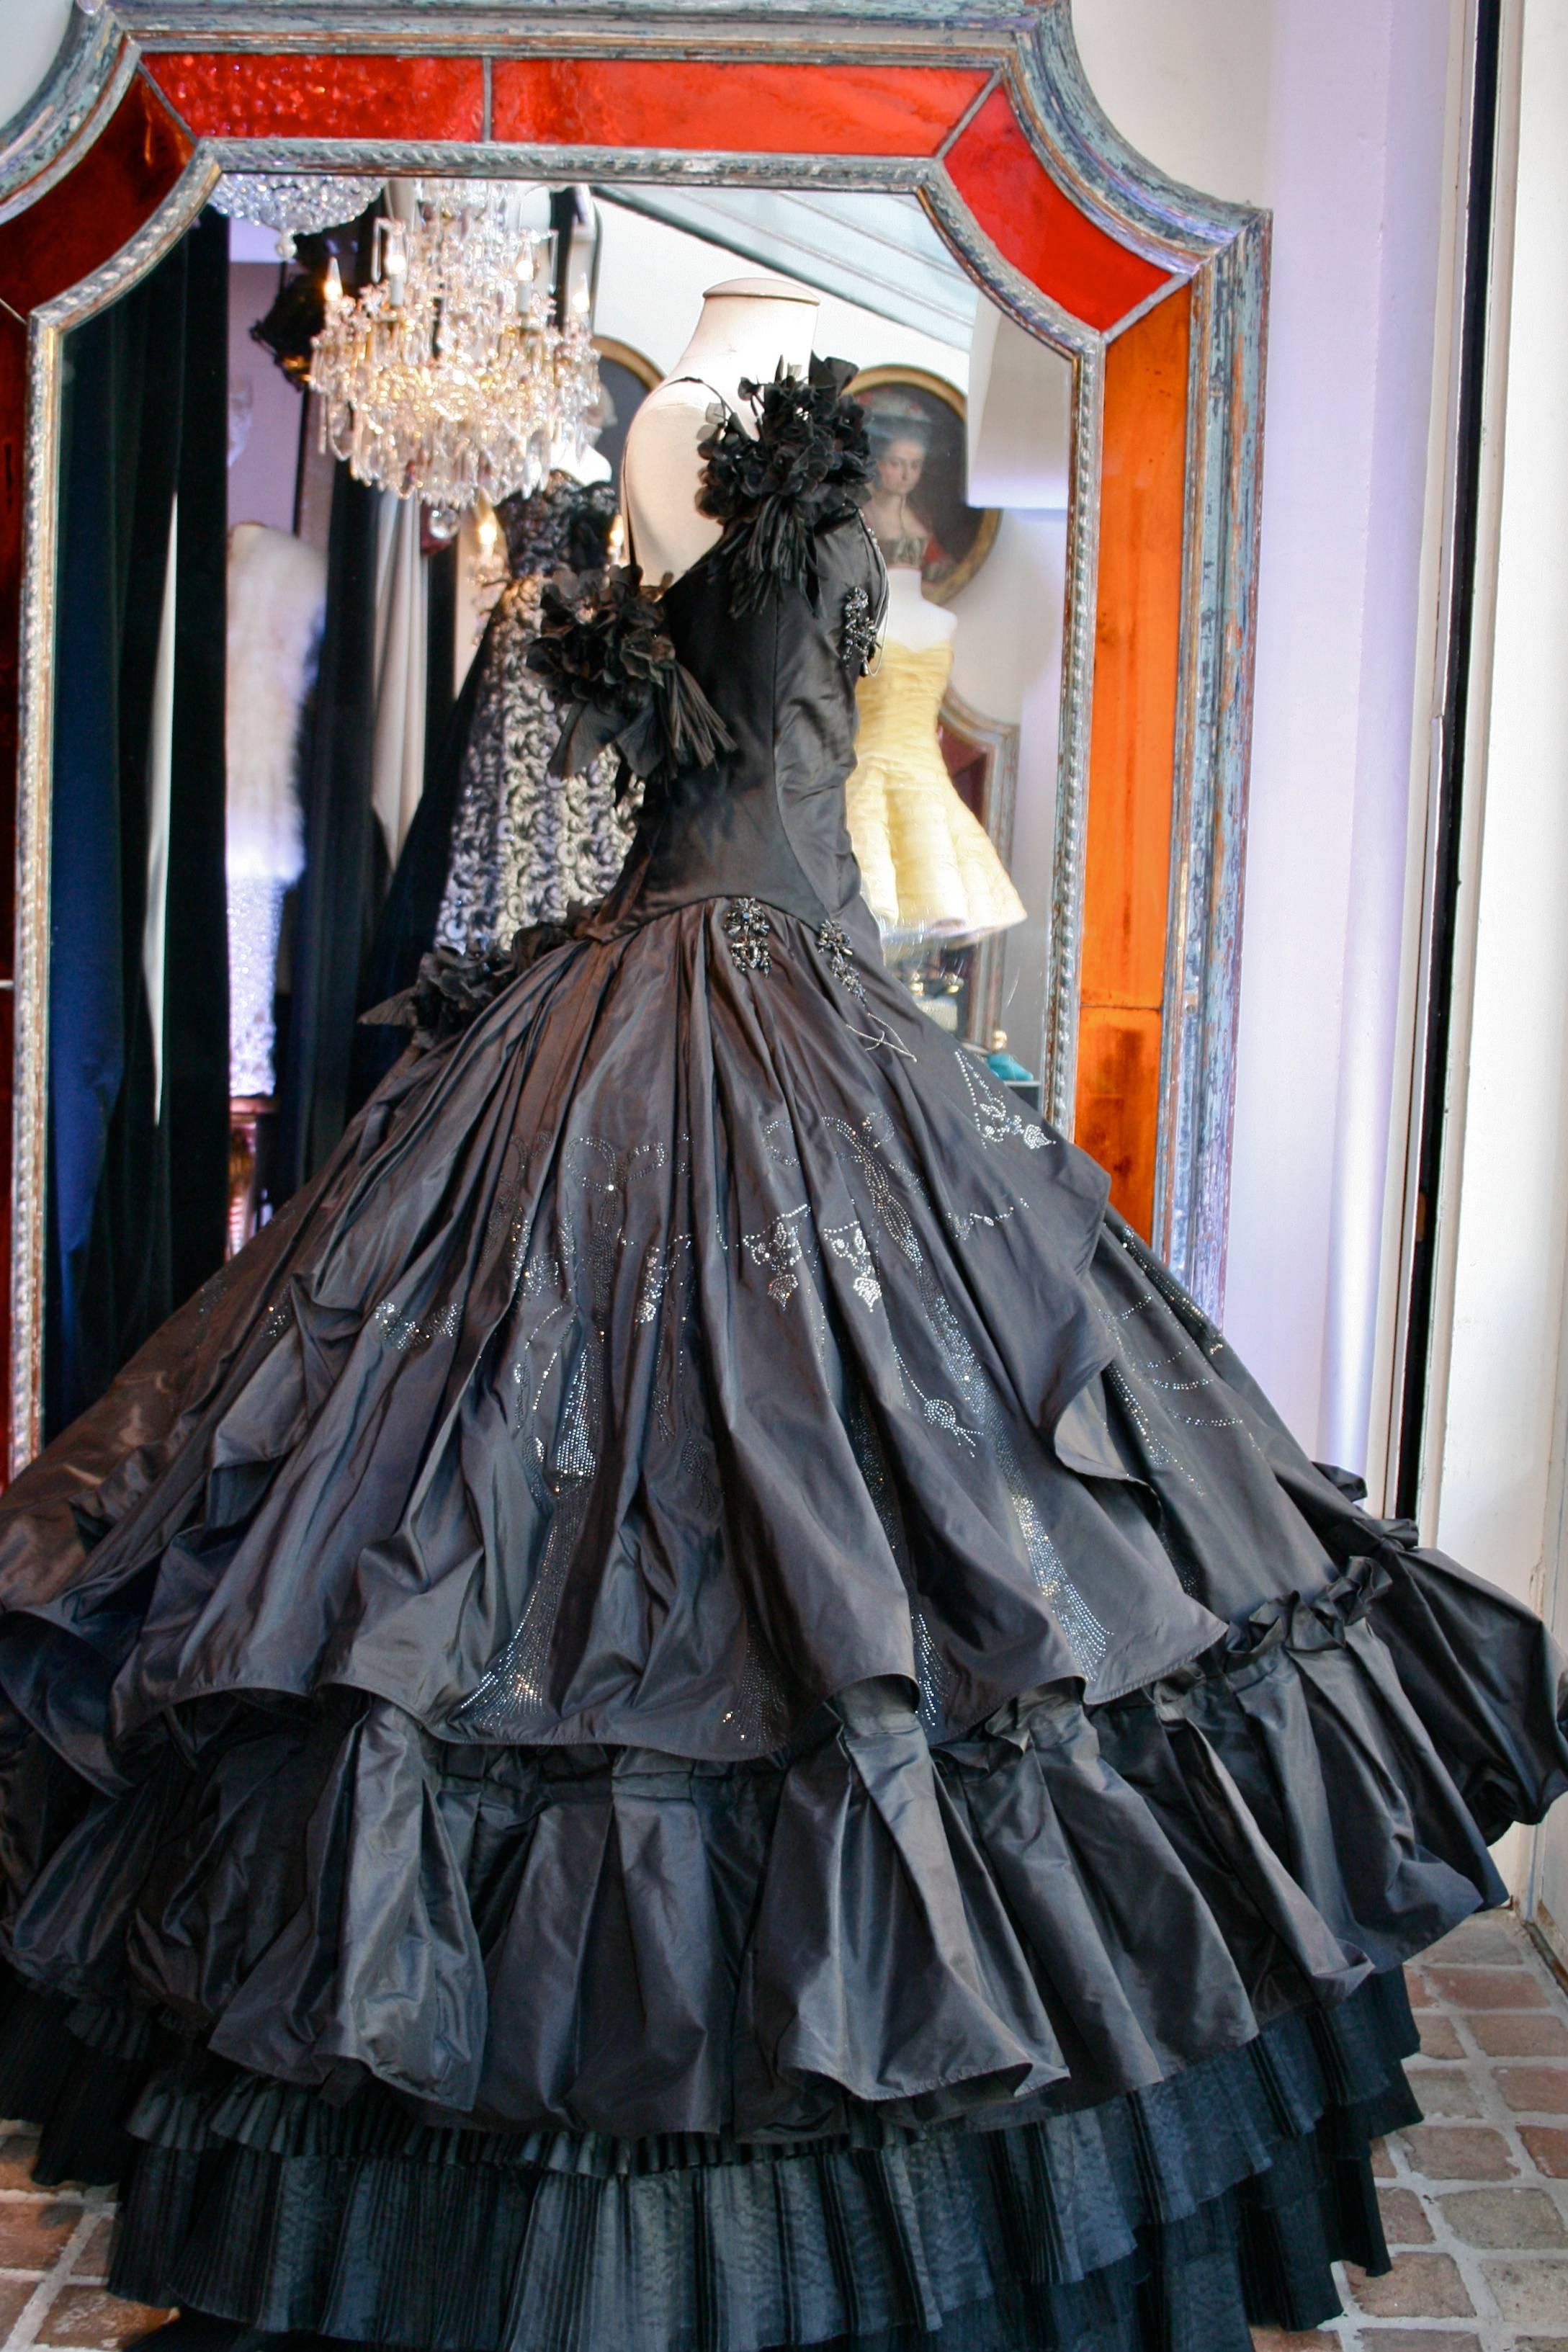 Torrente Défilé Haute Couture by Julien Fournier. Exceptional long dress, black silk taffeta, made of three layers of pleated frills and tulle, with a crinoline -like petticoat.The dress is embellished with black and white rhinestones, and